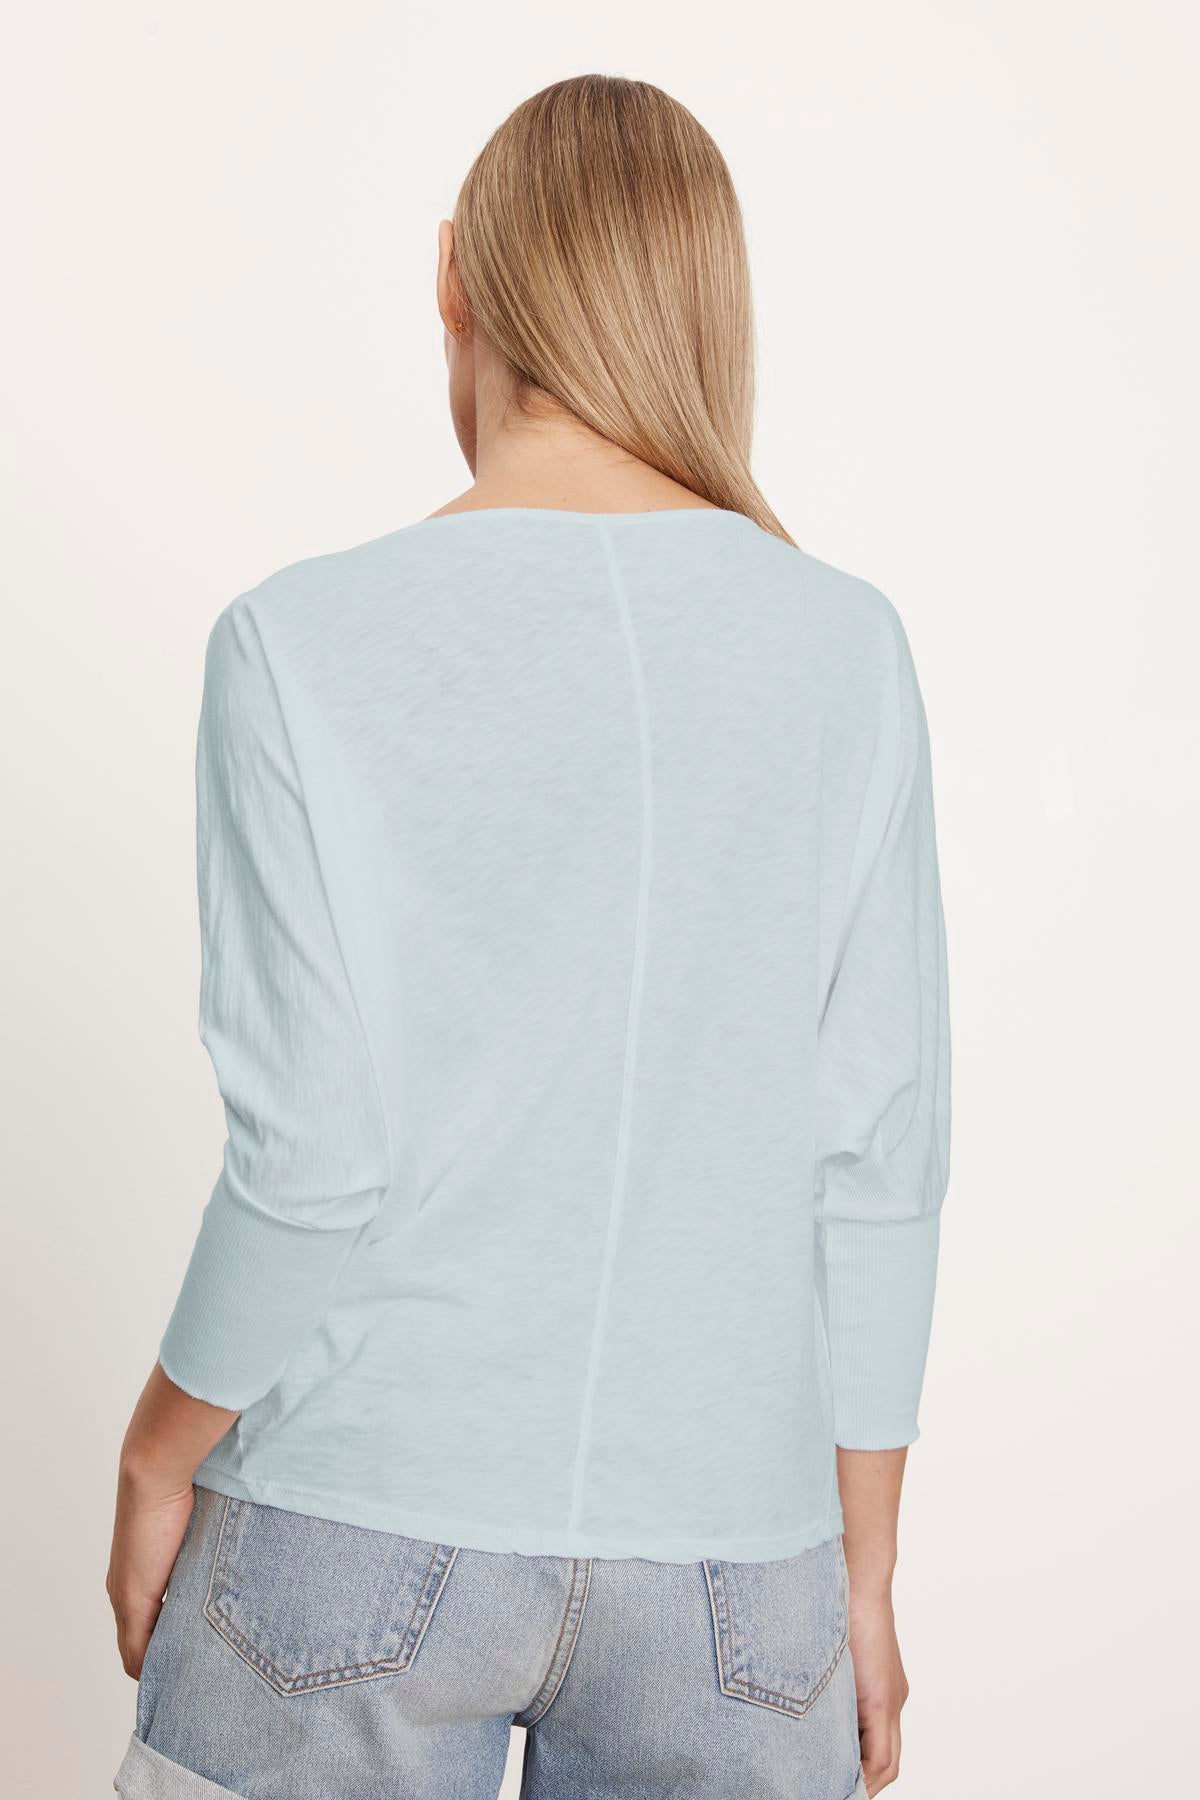   A woman with long blonde hair is shown from the back, wearing a light blue, slightly cropped Velvet by Graham & Spencer JOSS DOLMAN SLEEVE TEE and light-colored jeans. 